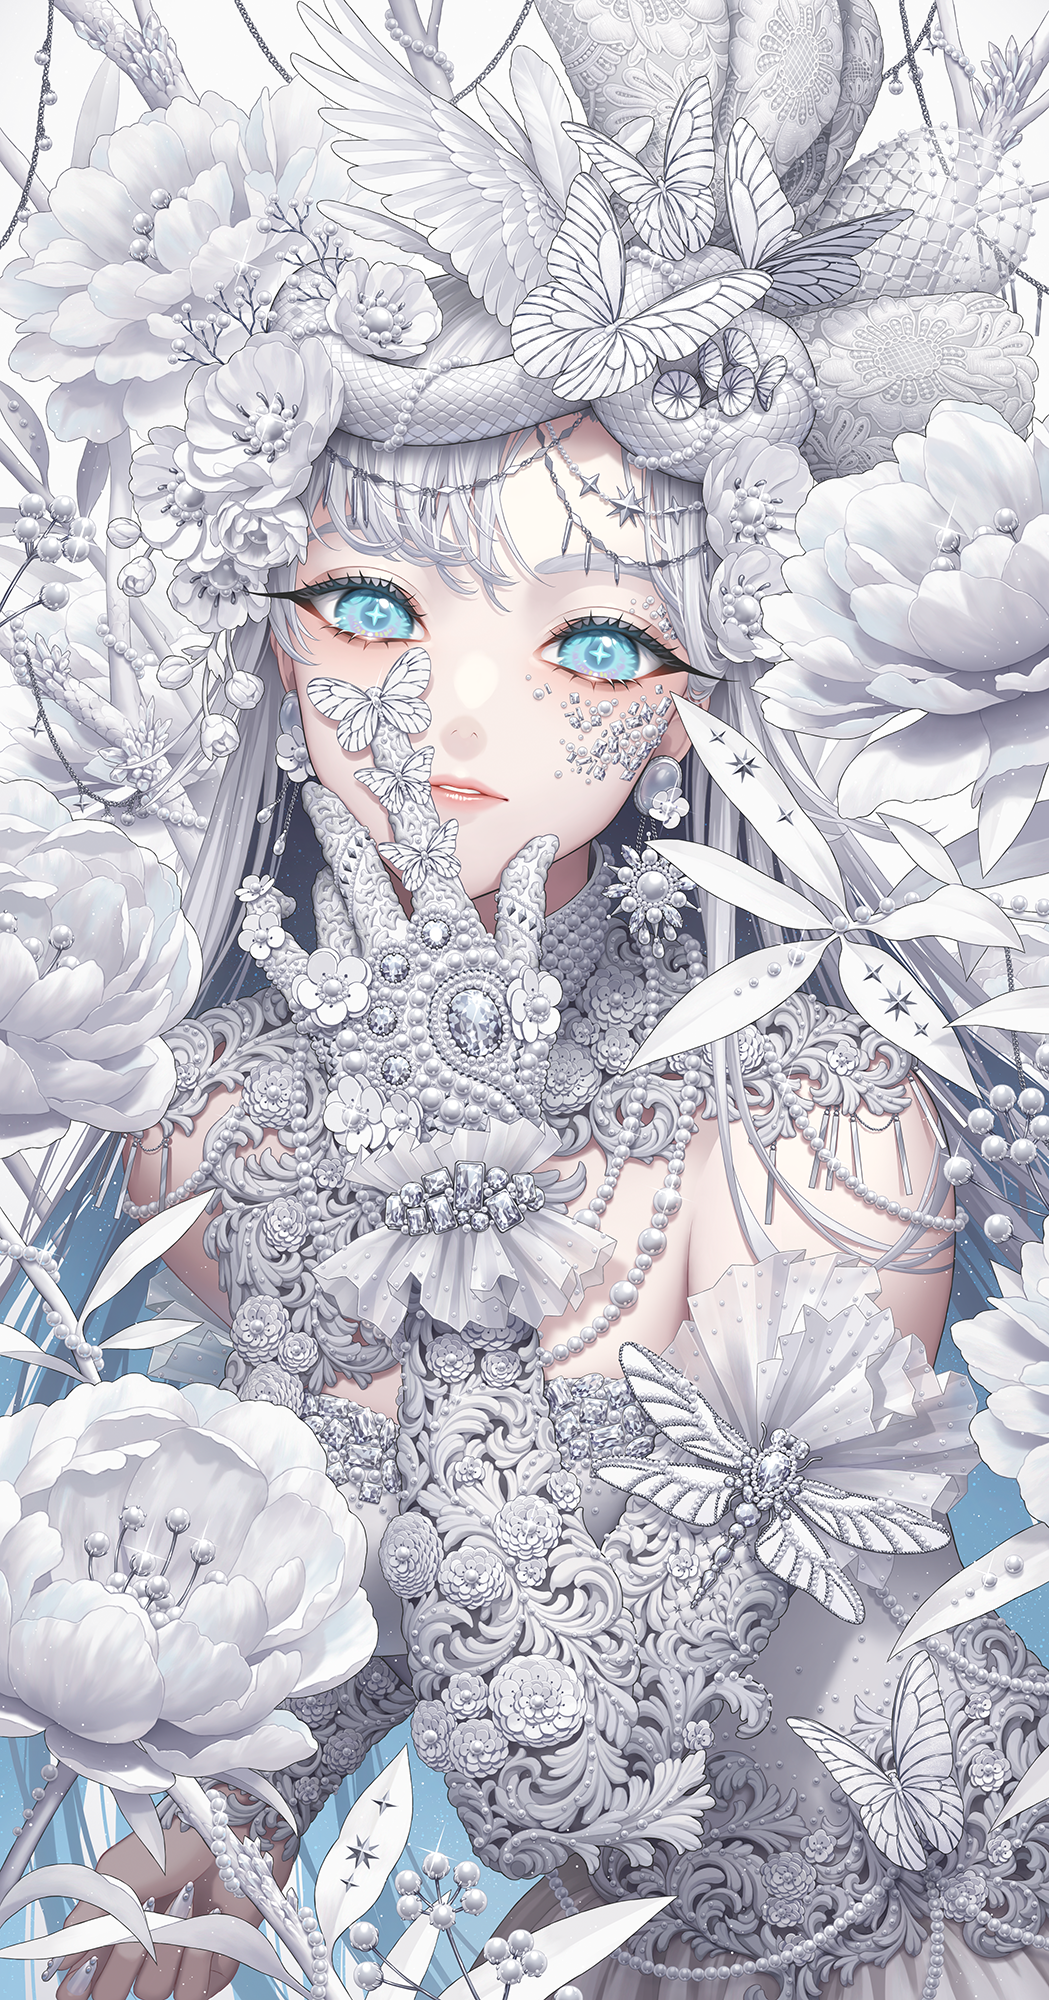 Anime 1049x2000 Minami portrait display white clothing animals light blue eyes butterfly white flowers white hair long hair looking at viewer hair ornament gloves white gloves earring snake pearl earrings pearl bracelet jewelry white dress white nails pearl necklace flowers parted lips aqua eyes dress anime girls